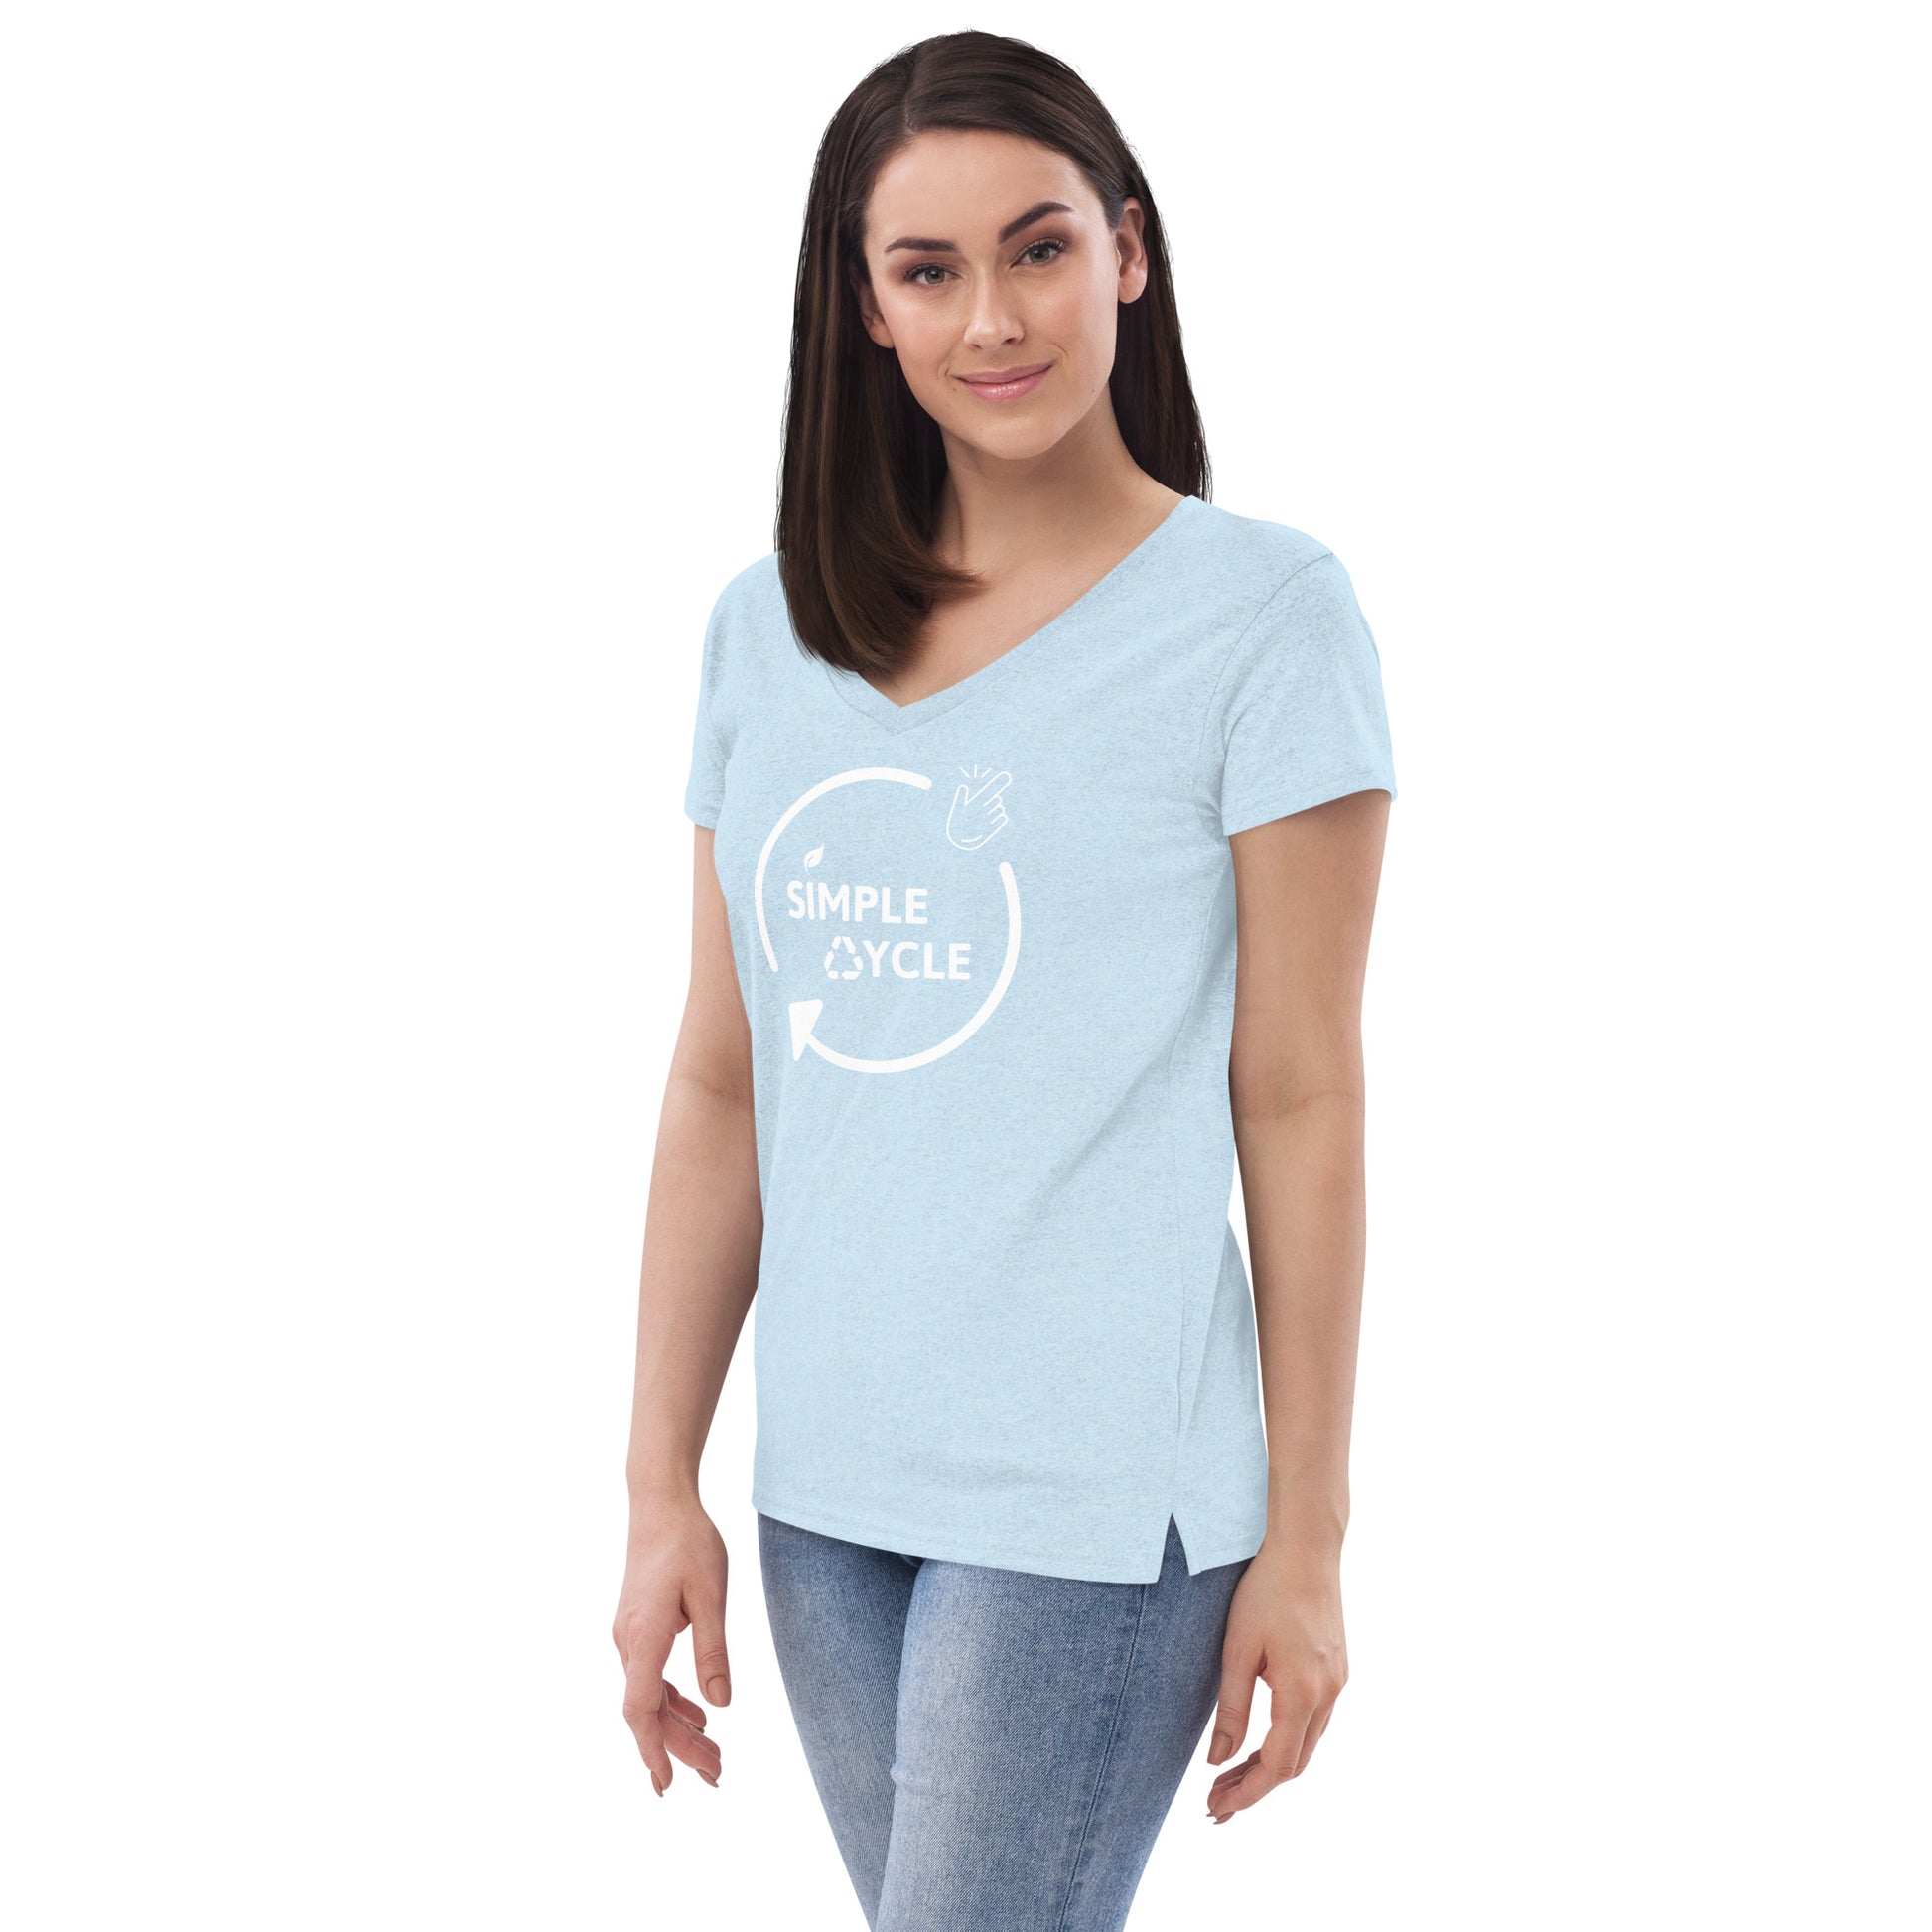 SimpleCycle Women’s Recycled V-Neck T-Shirt crystal blue left front